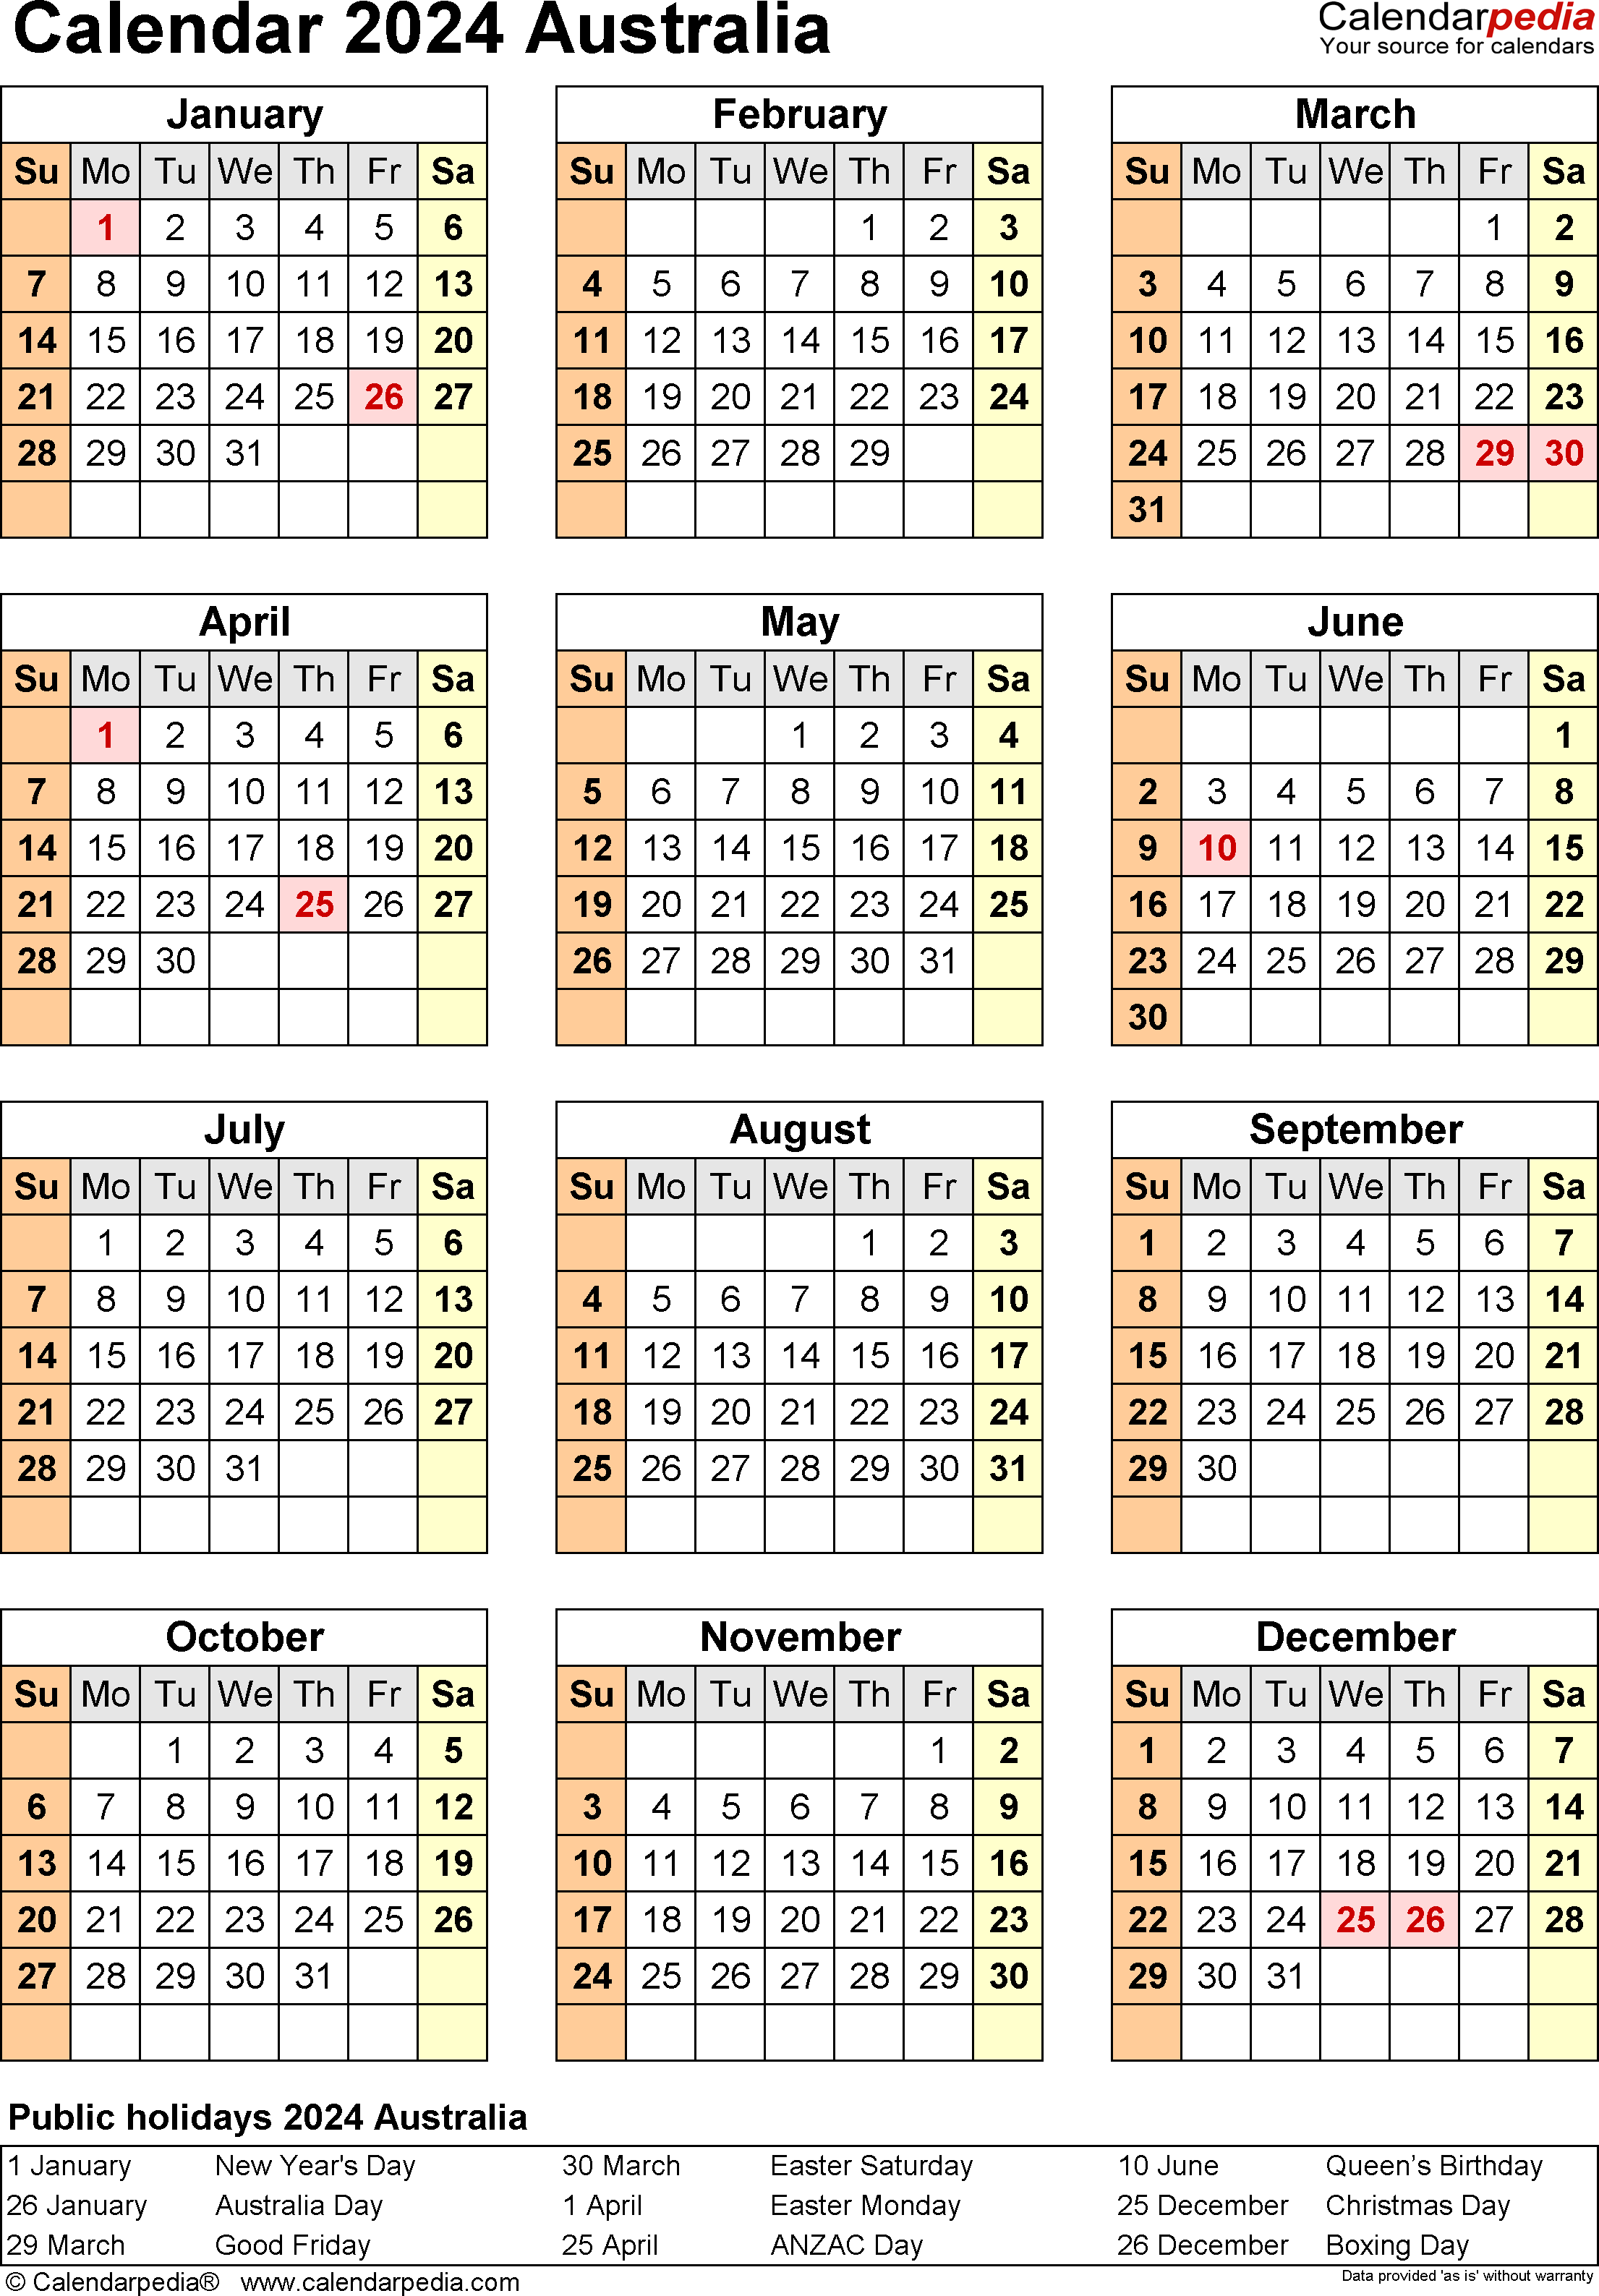 Free Printable 2024 And 2024 Calendar With School Kids 2024 CALENDAR - Free Printable 2024 Australian Calendar With Holidays